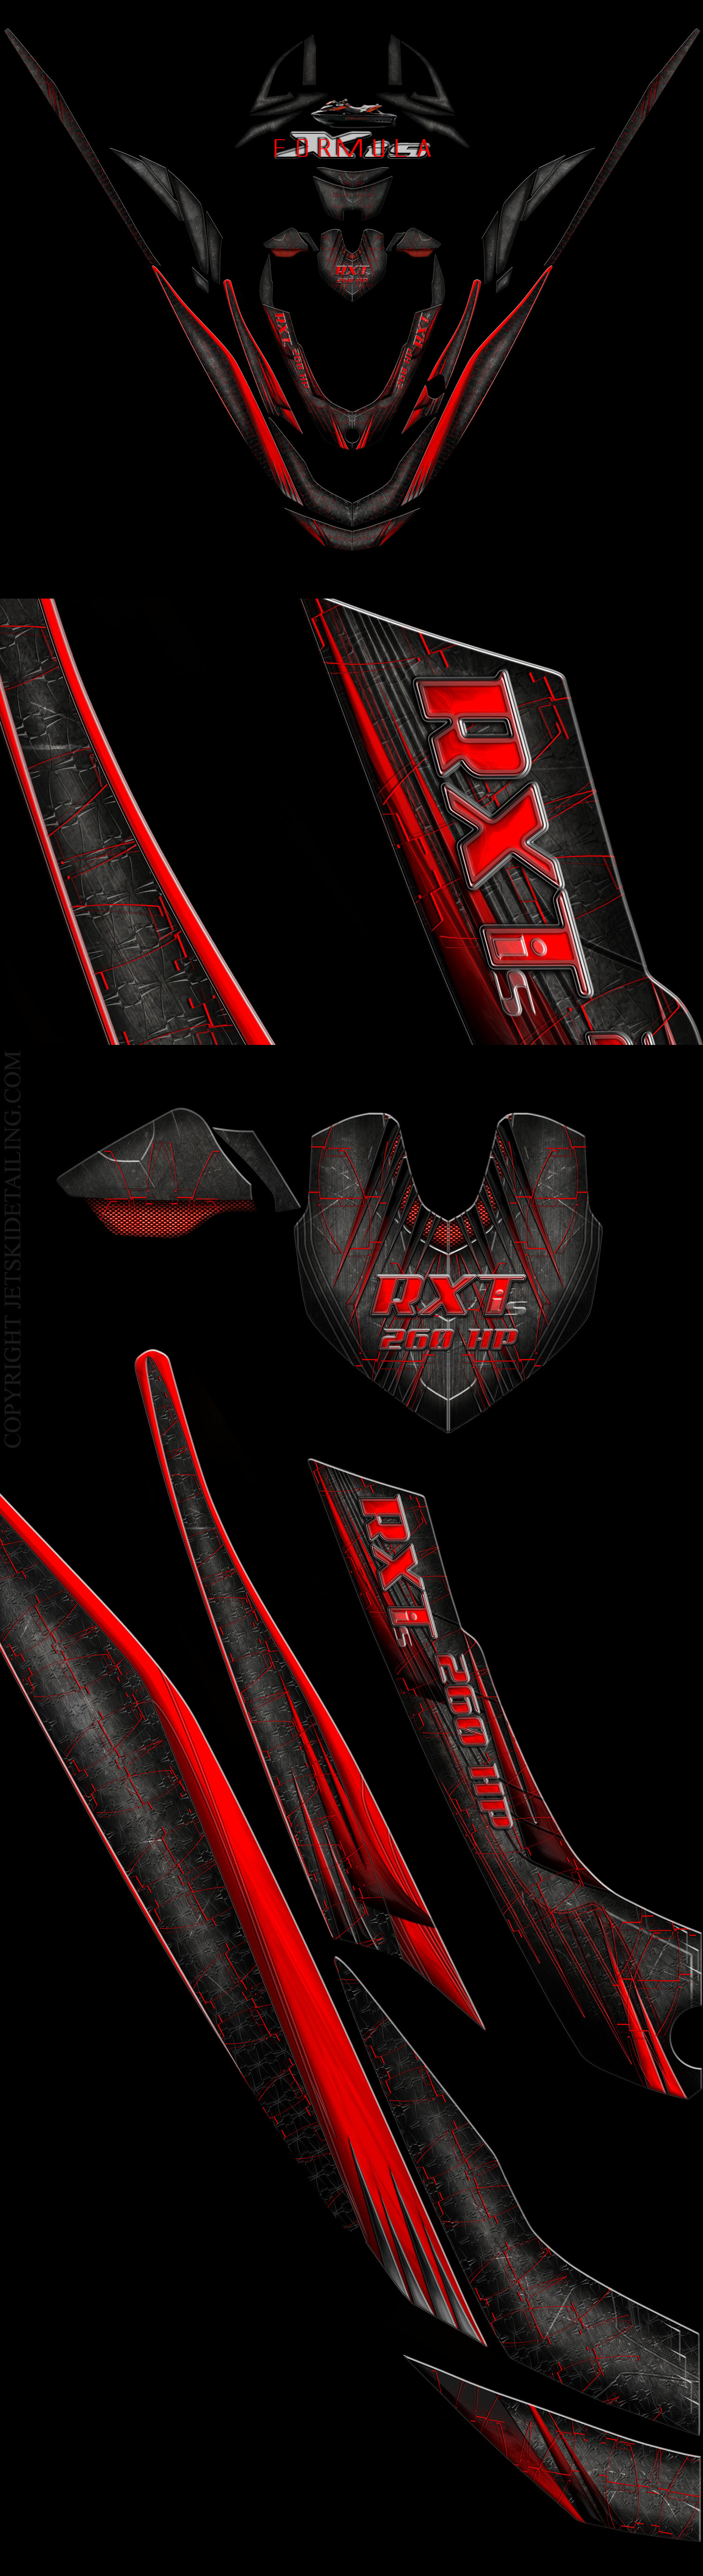 RXT-iS FORMULA RED SEADOO WRAP